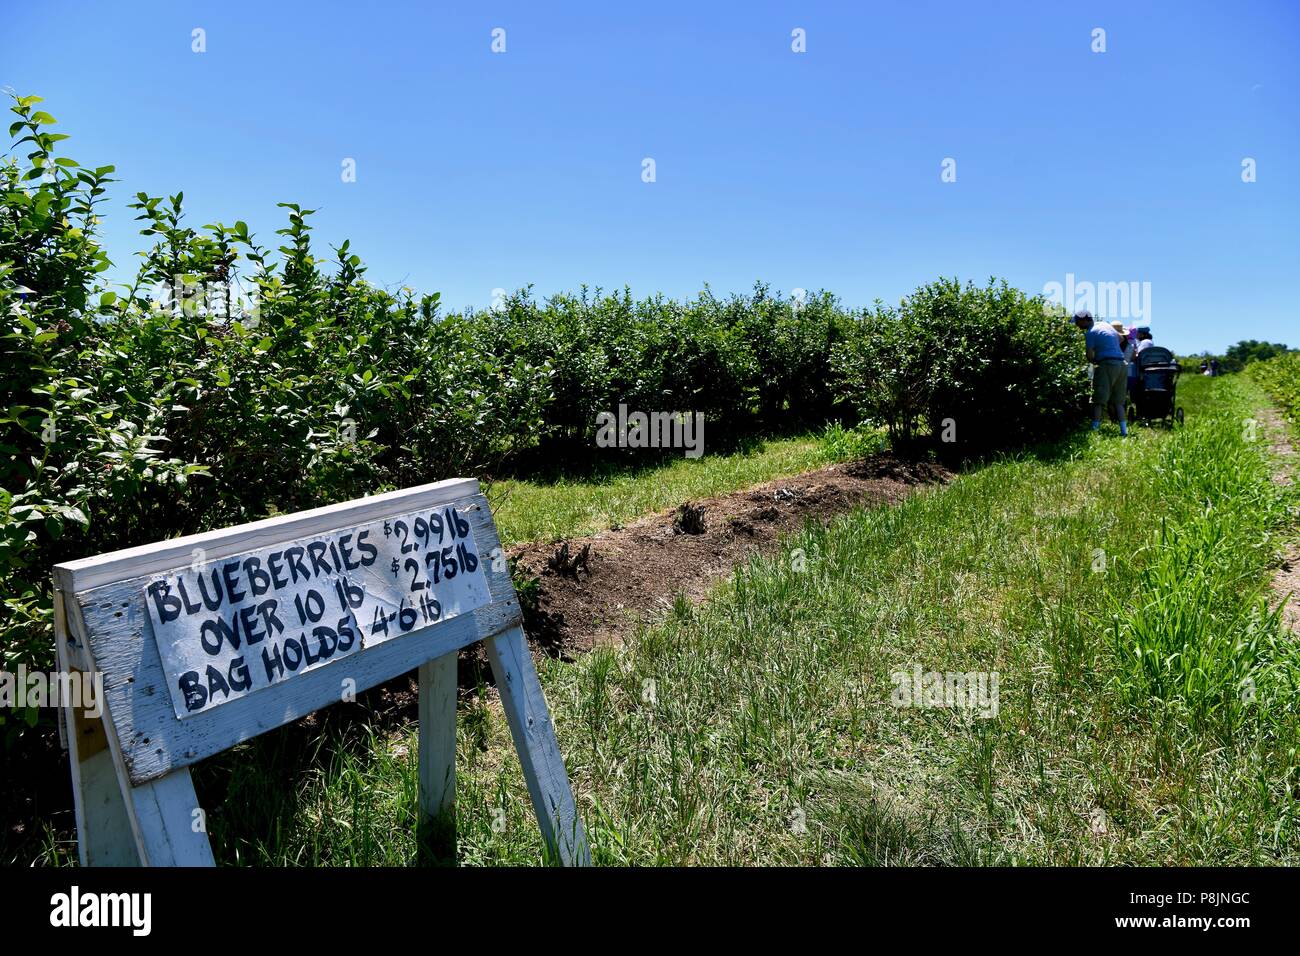 People picking berries at a U-pick blueberry field Stock Photo